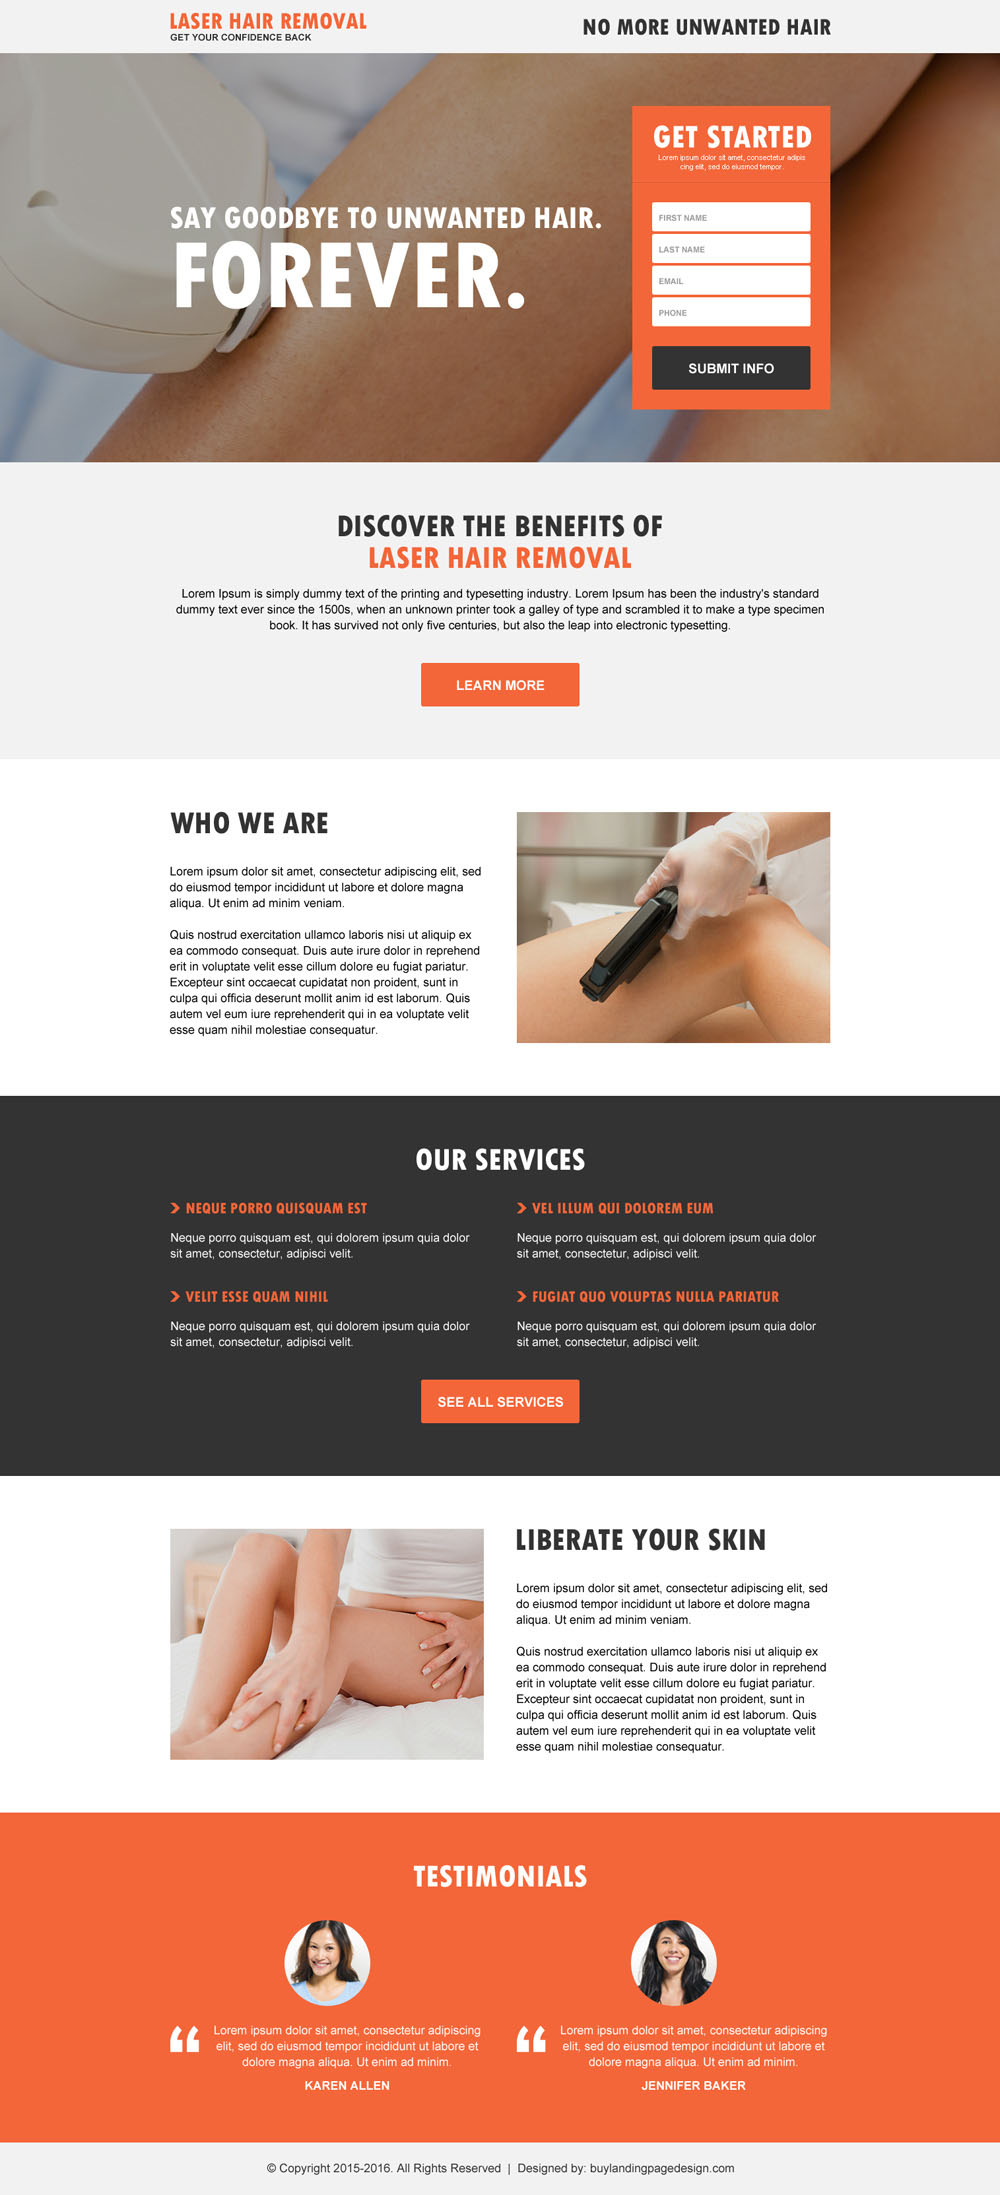 laser-hair-removal-service-to-say-goodbye-unwanted-hair-forever-landing-page-design-002